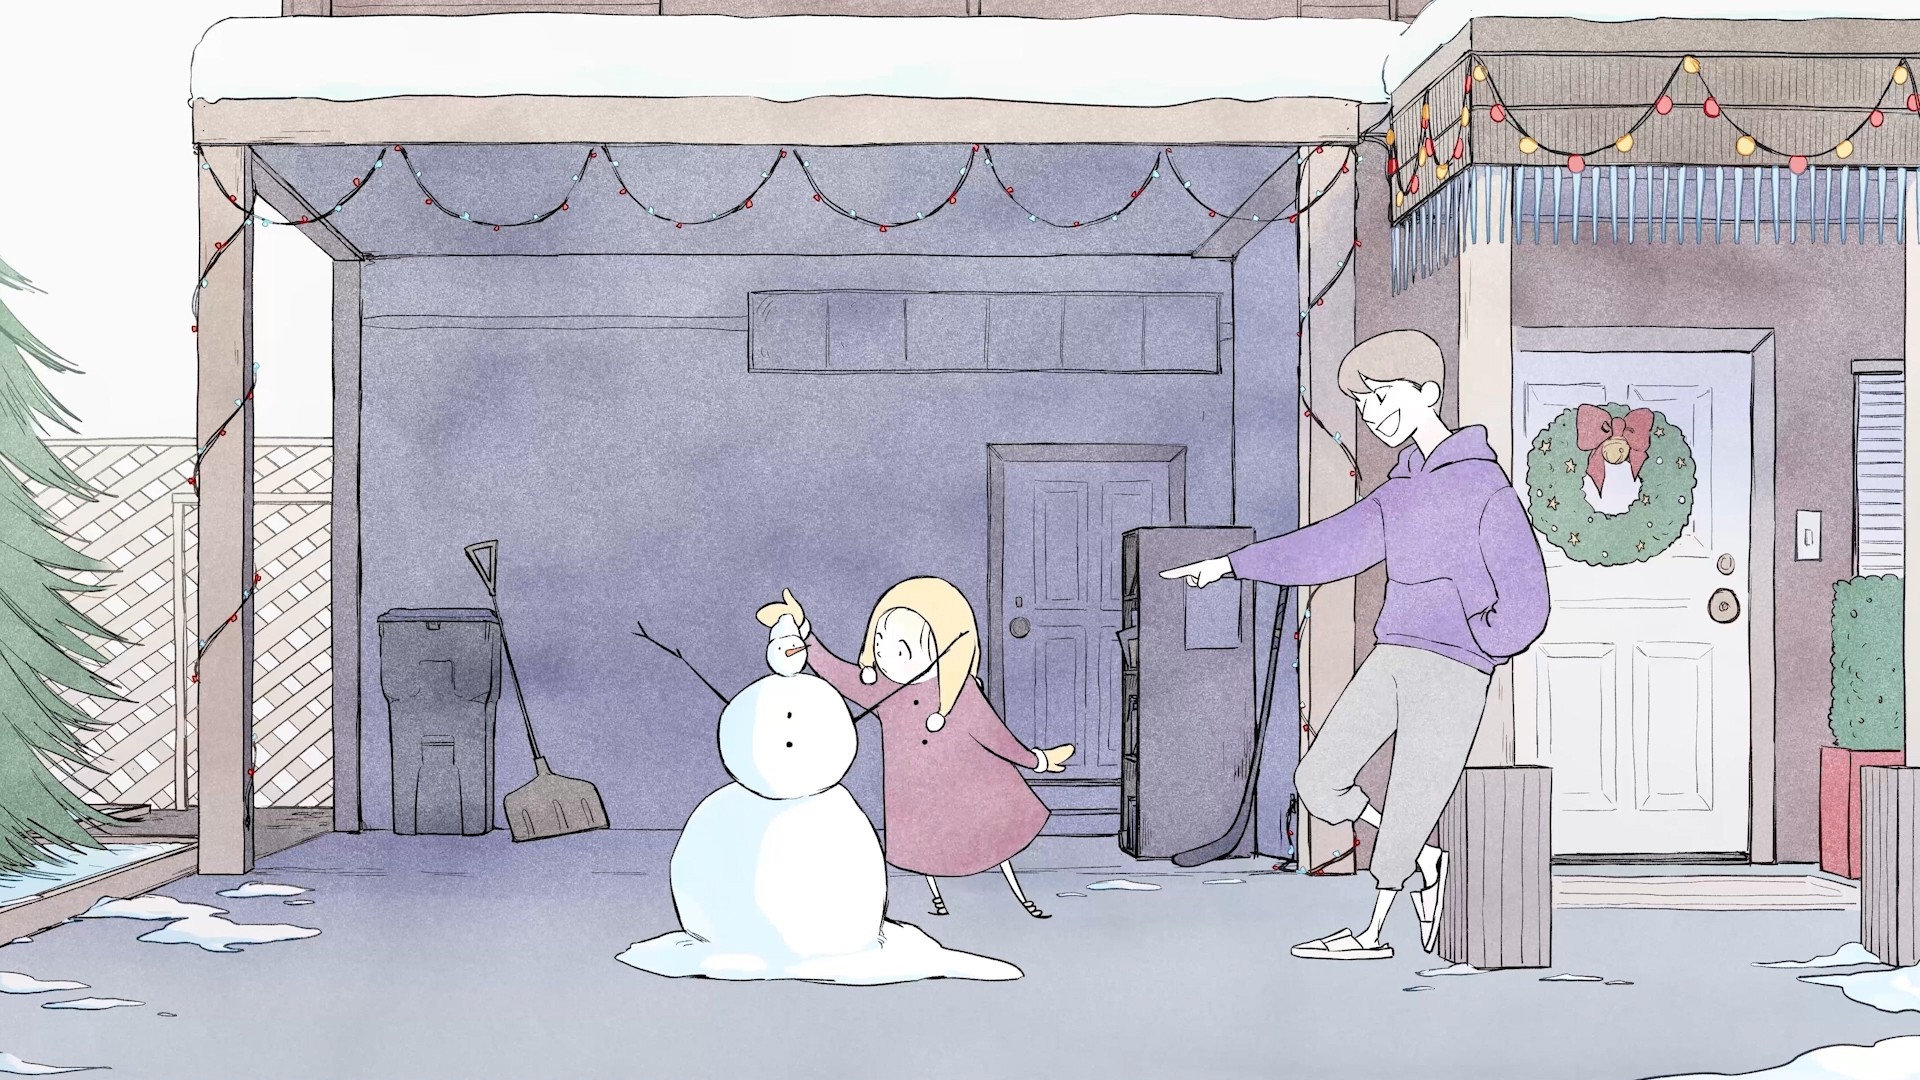 An animation of a young girl building a snowman.